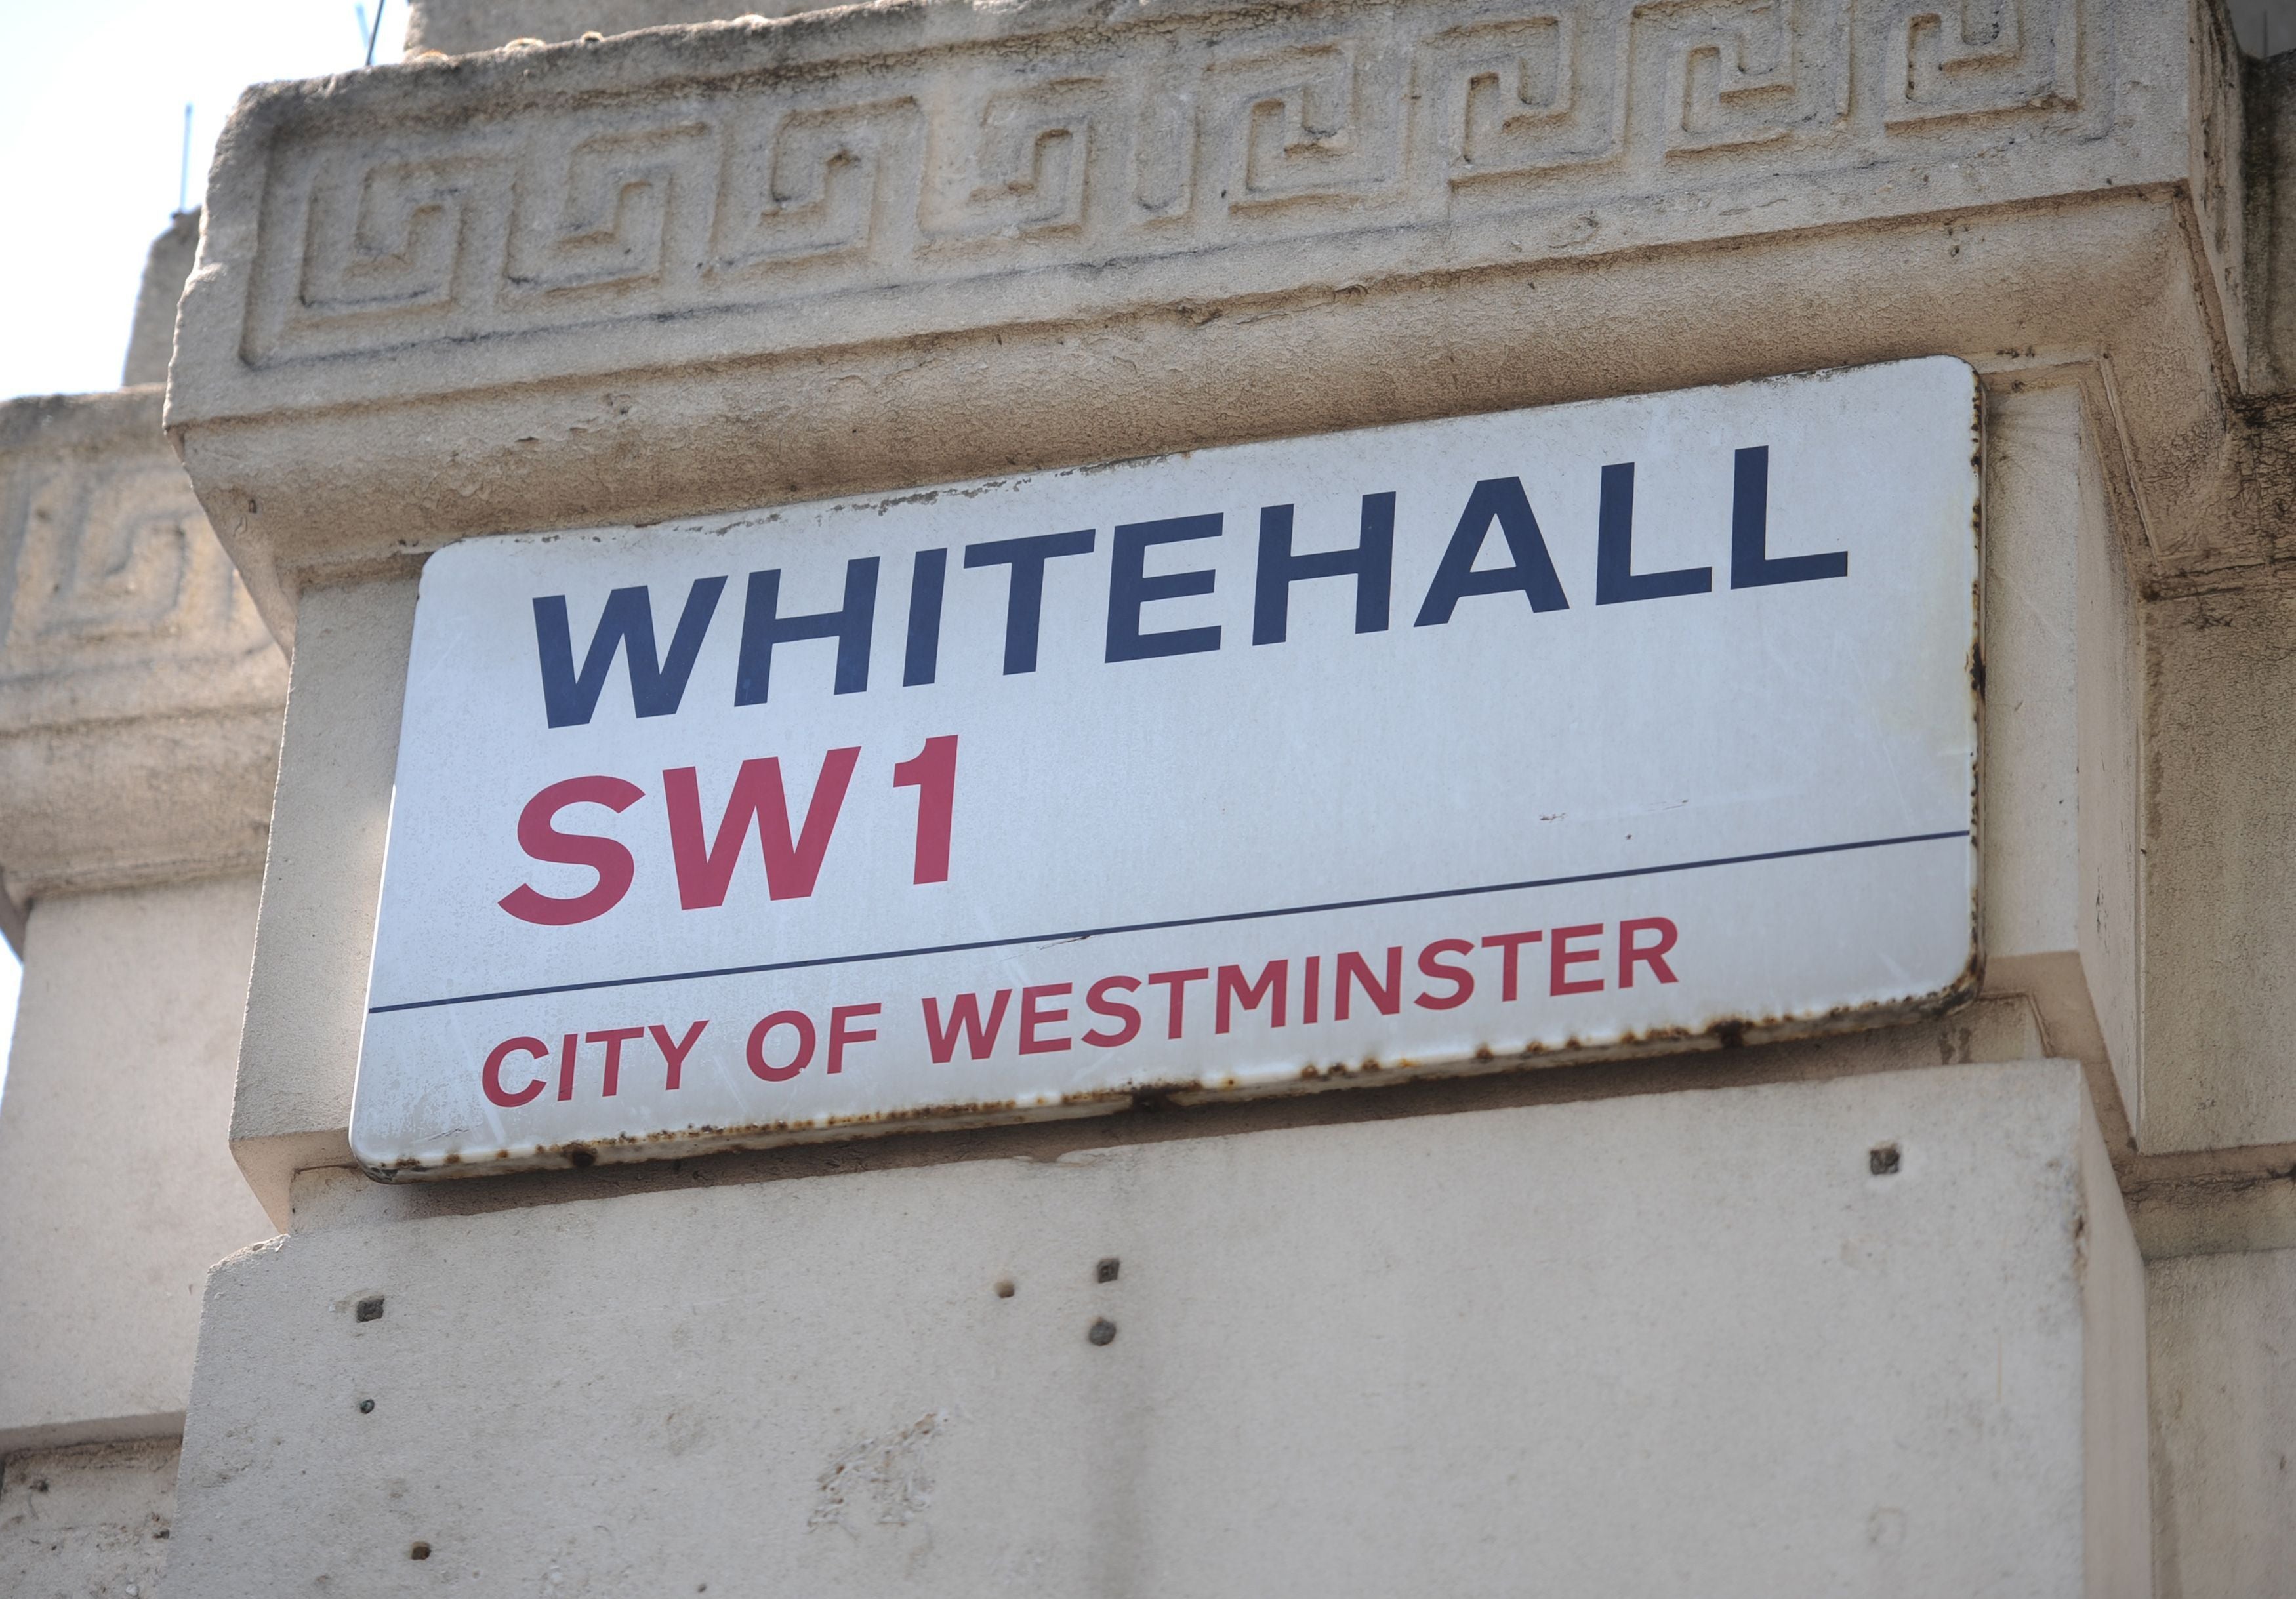 The first tranche of fines issued by police investigating Whitehall held during lock down has begun arriving, it has been reported (PA)